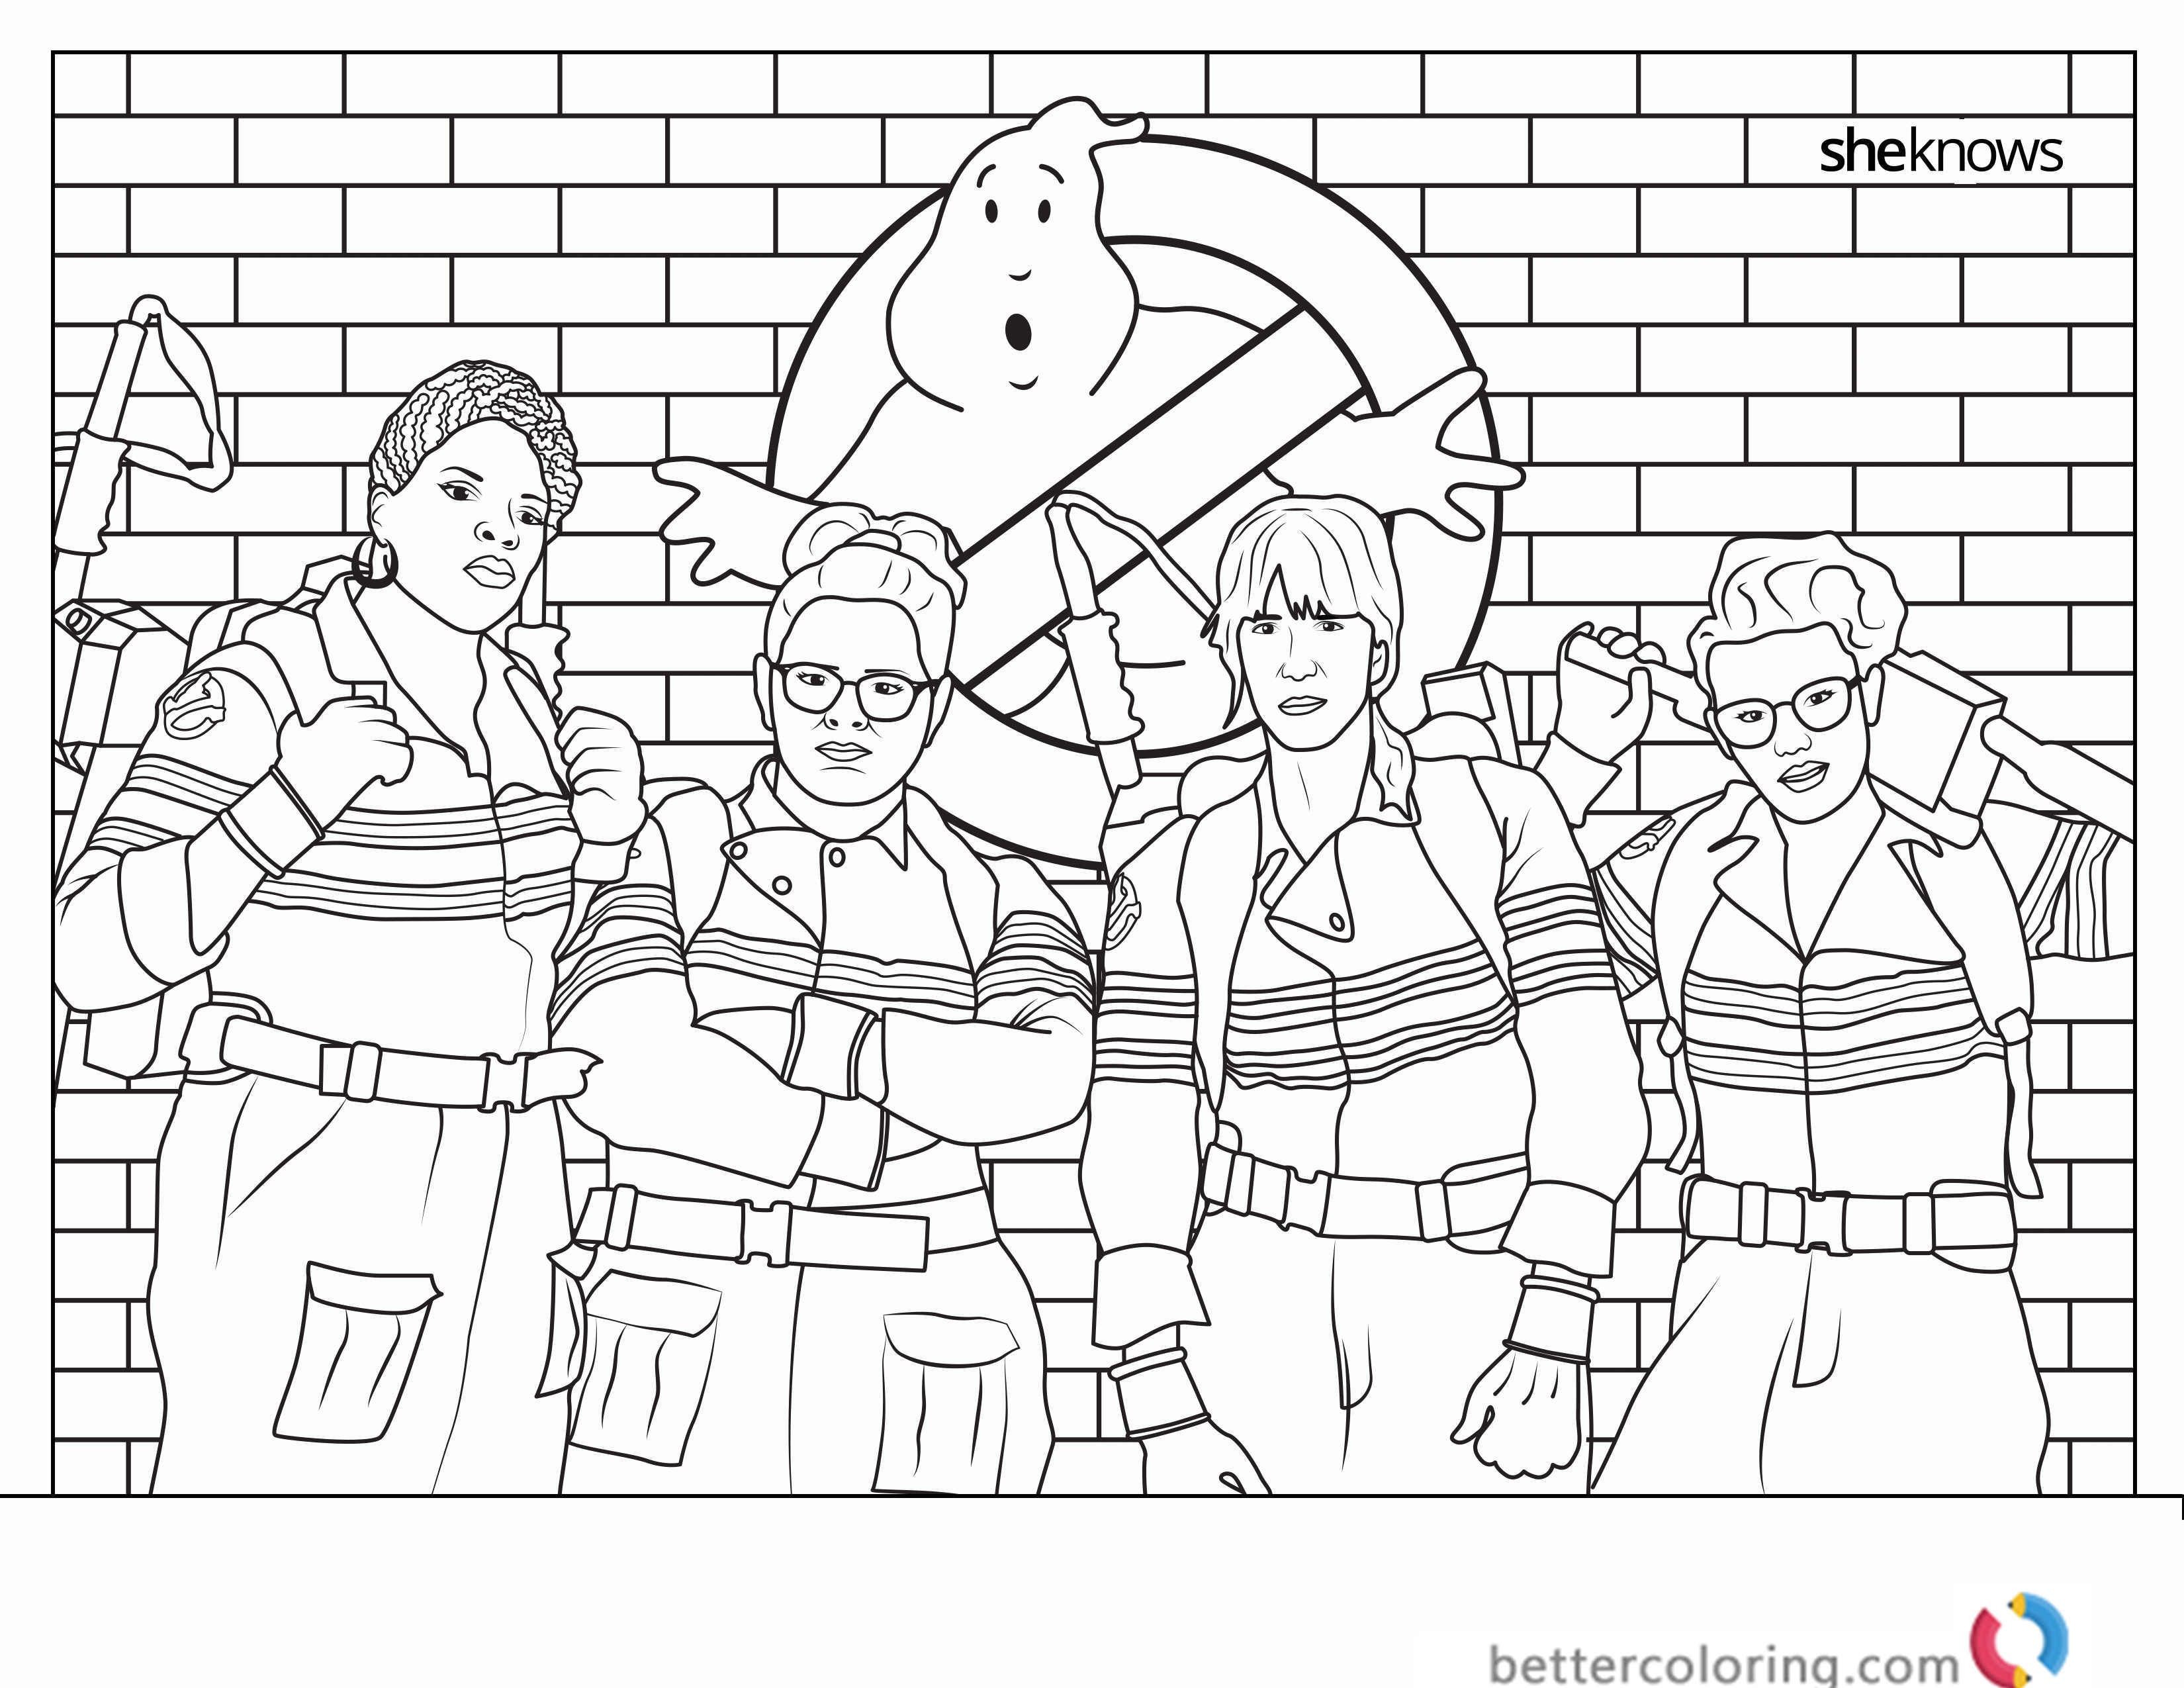 Ghostbusters Papercraft Free Ghostbusters Coloring Pages for Kids and Adults